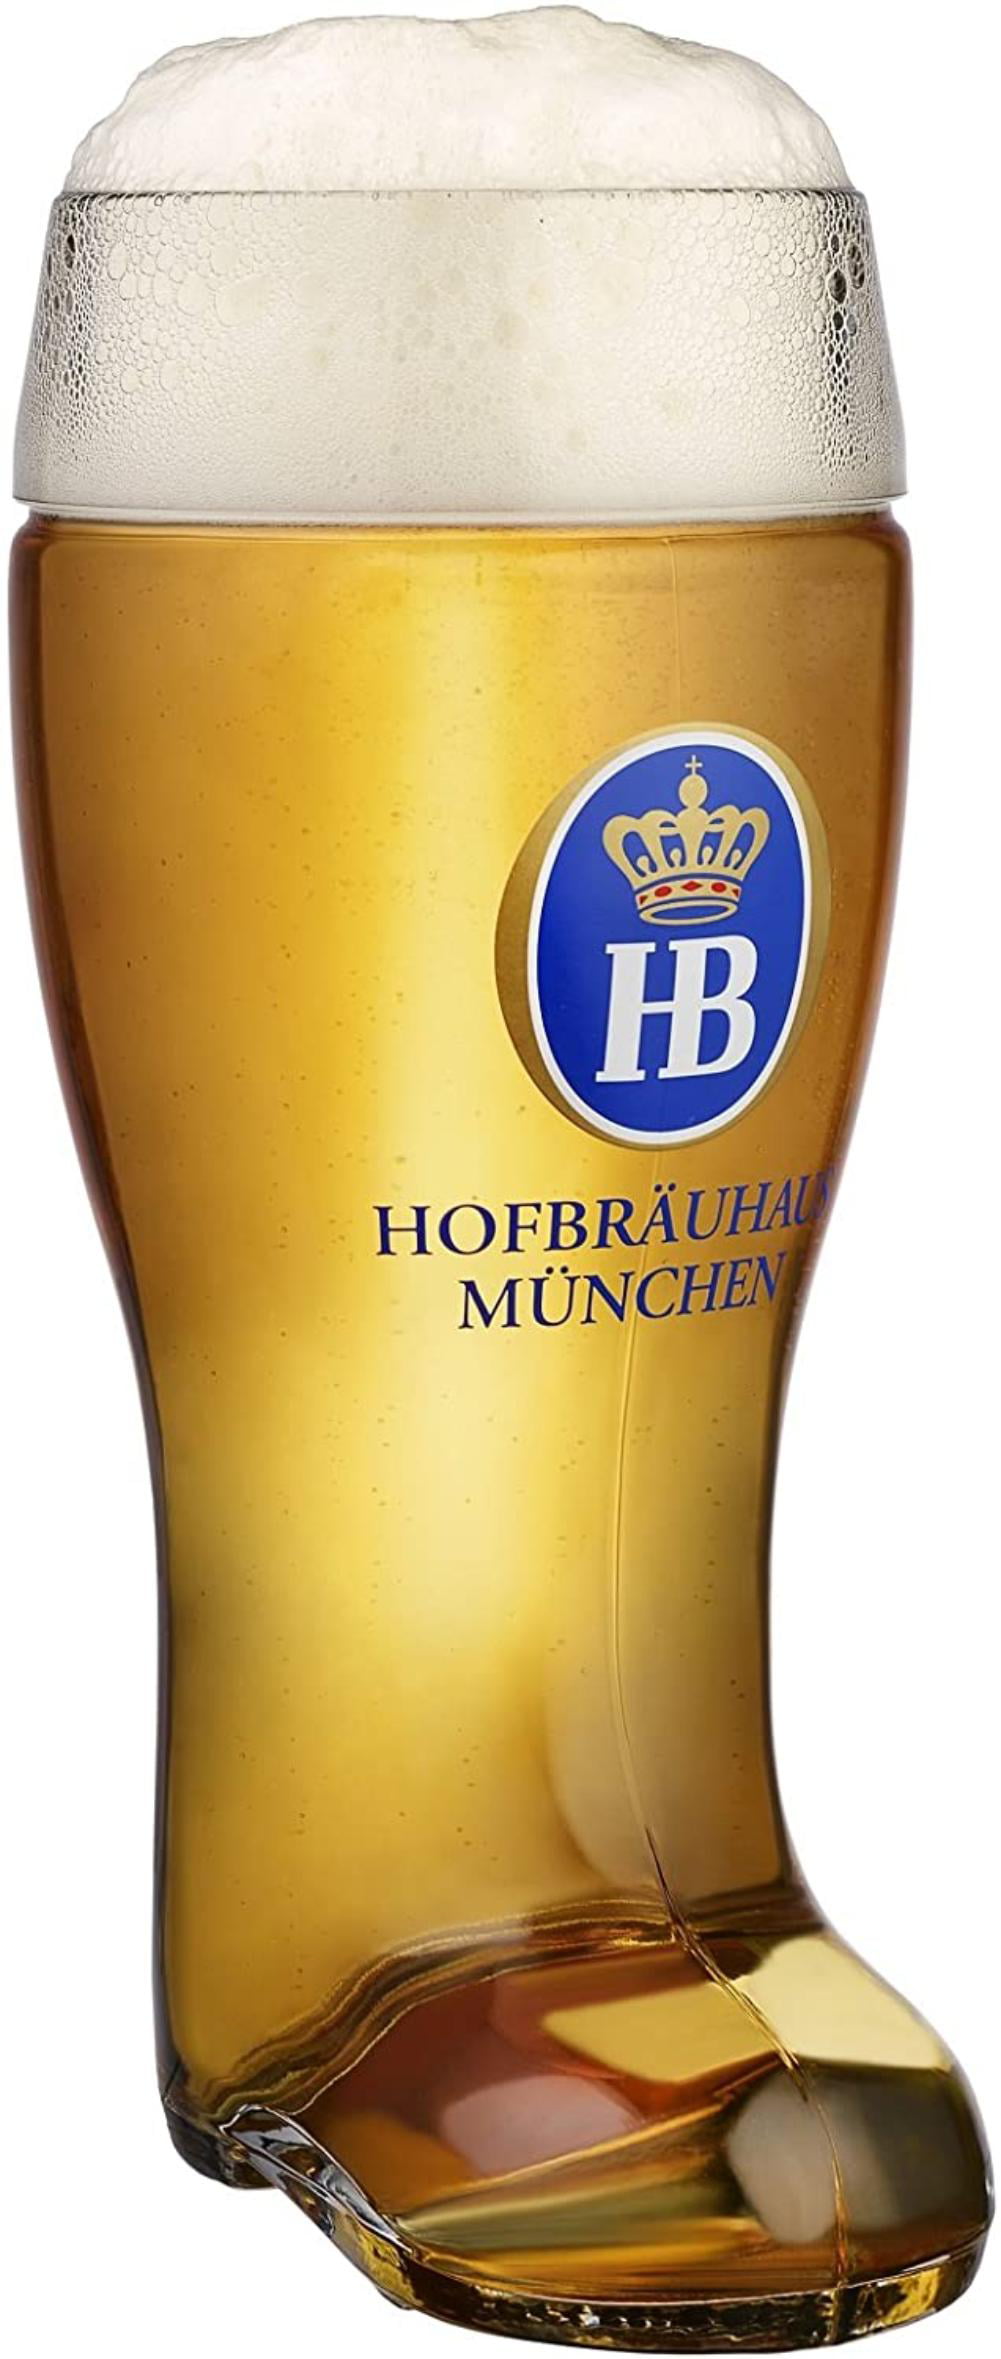 Details about   HB Munchen beer glass 0,5L 